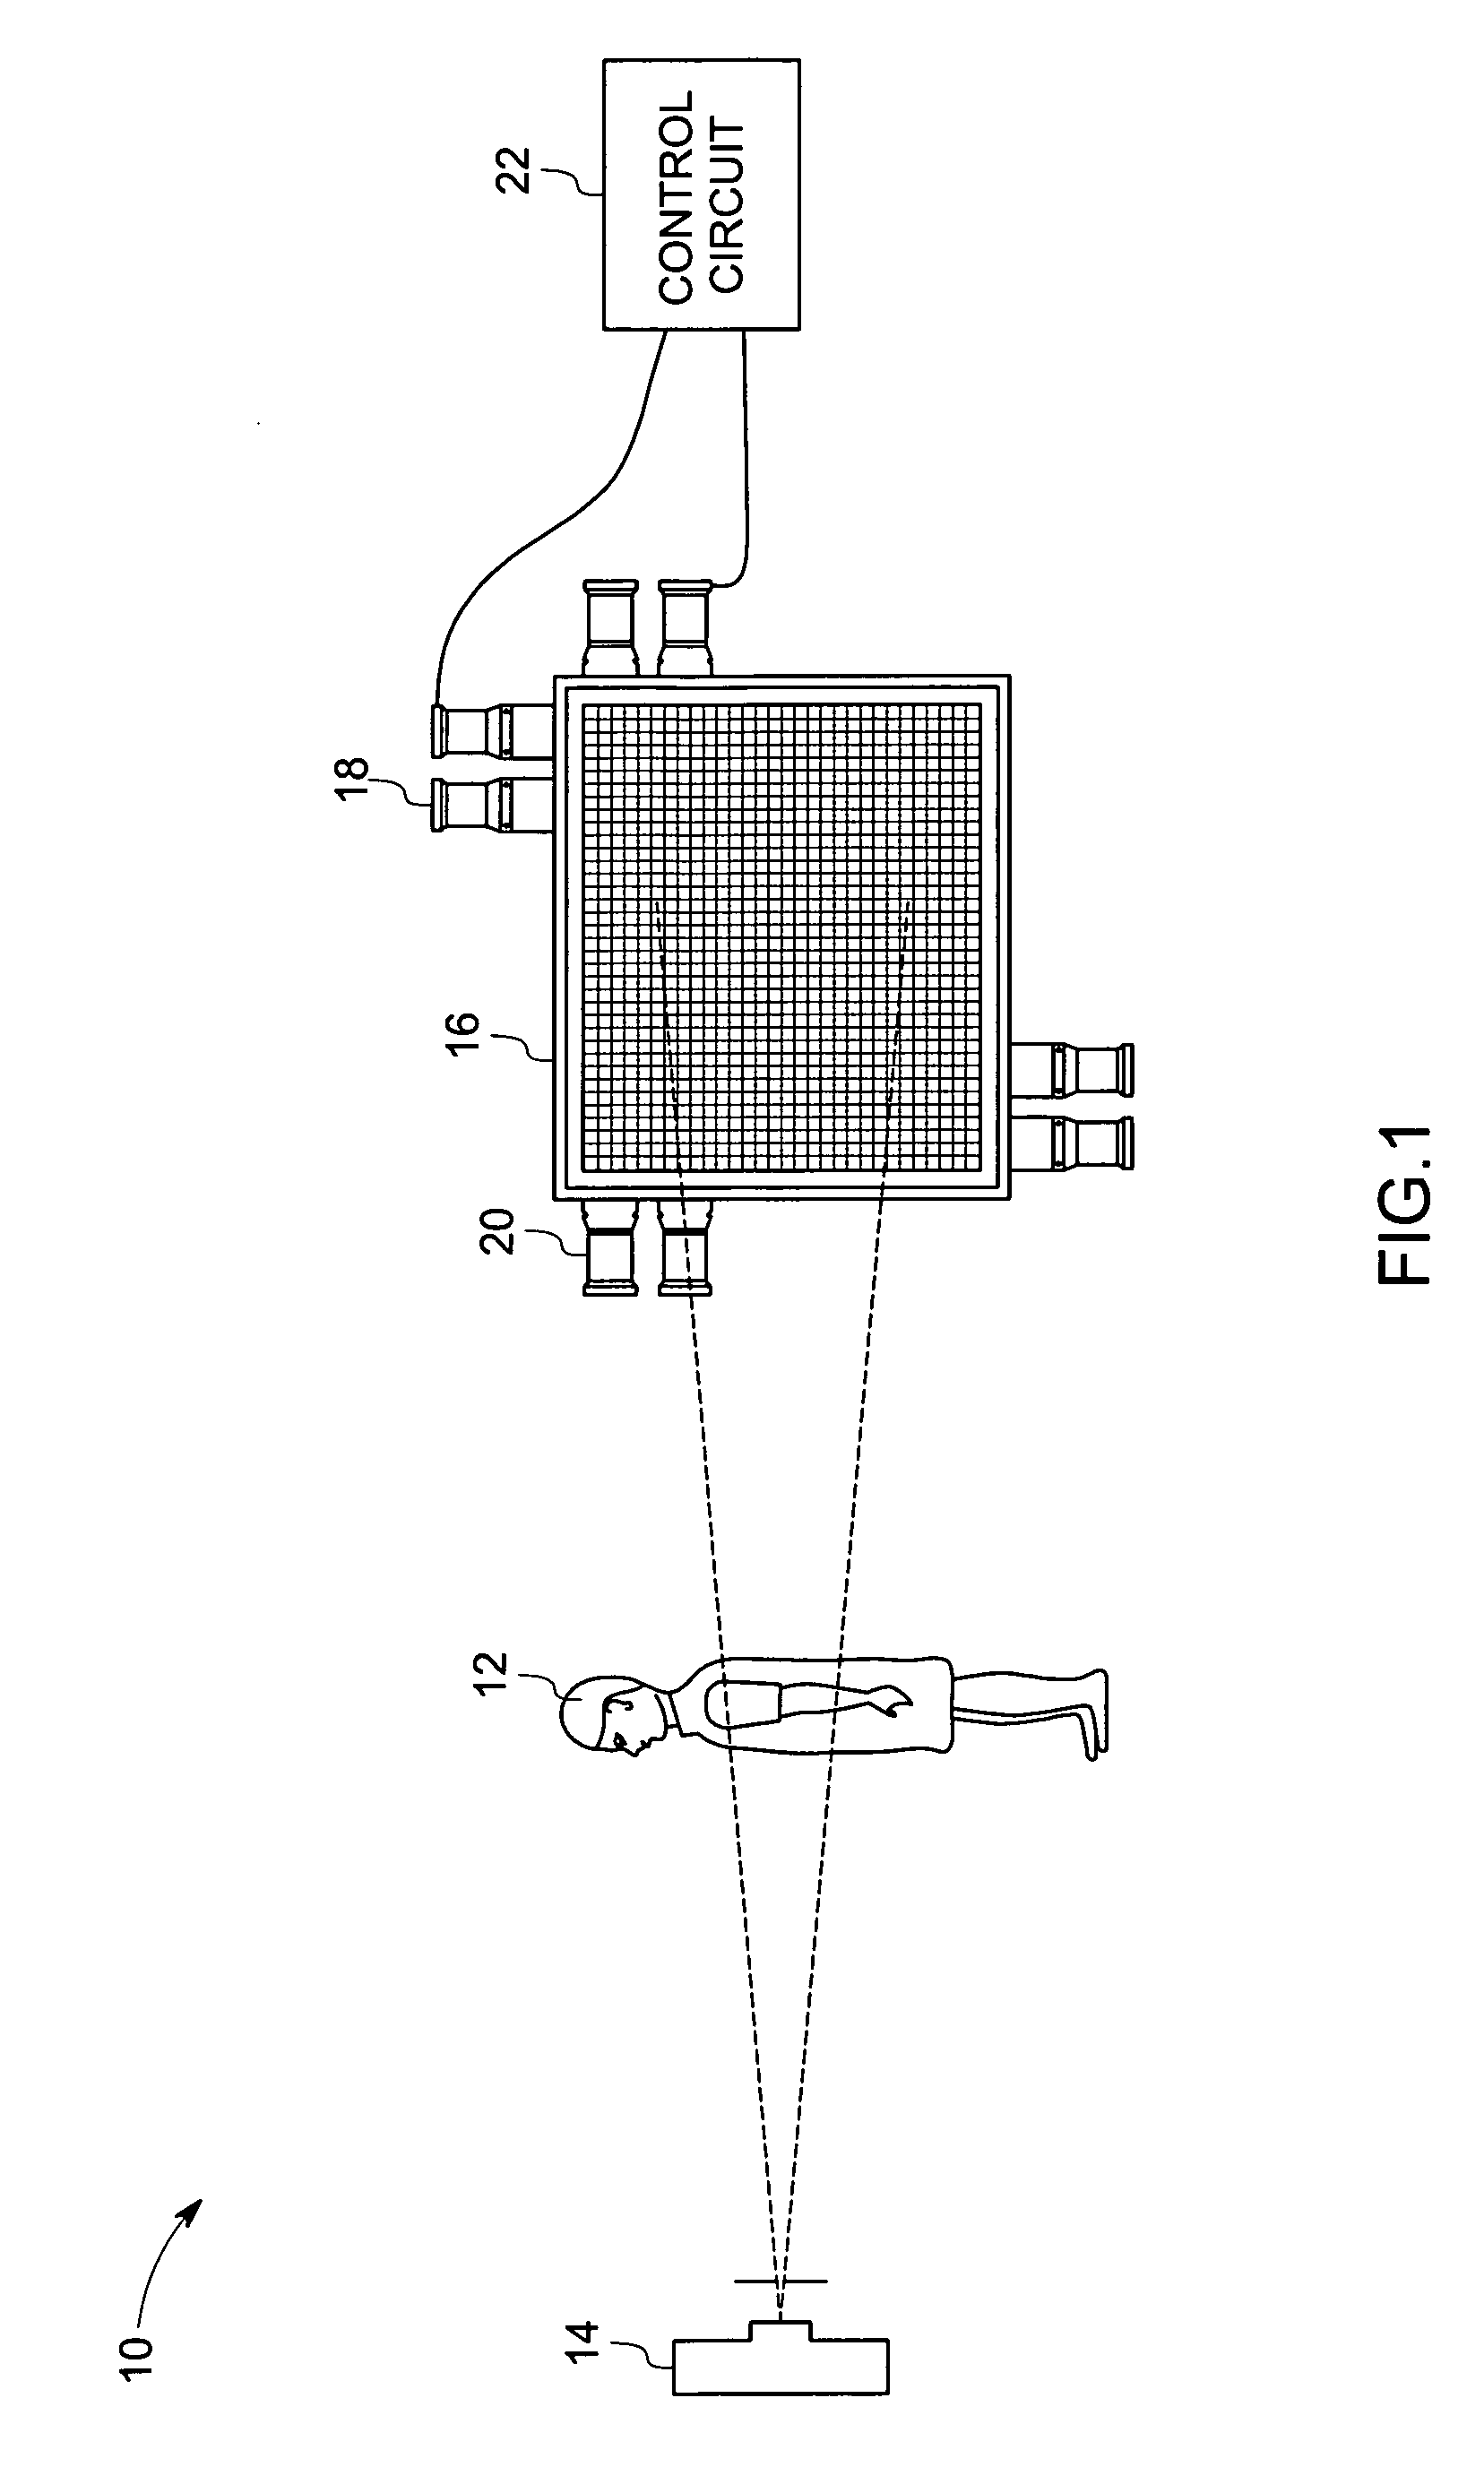 Data acquisition system for medical imaging